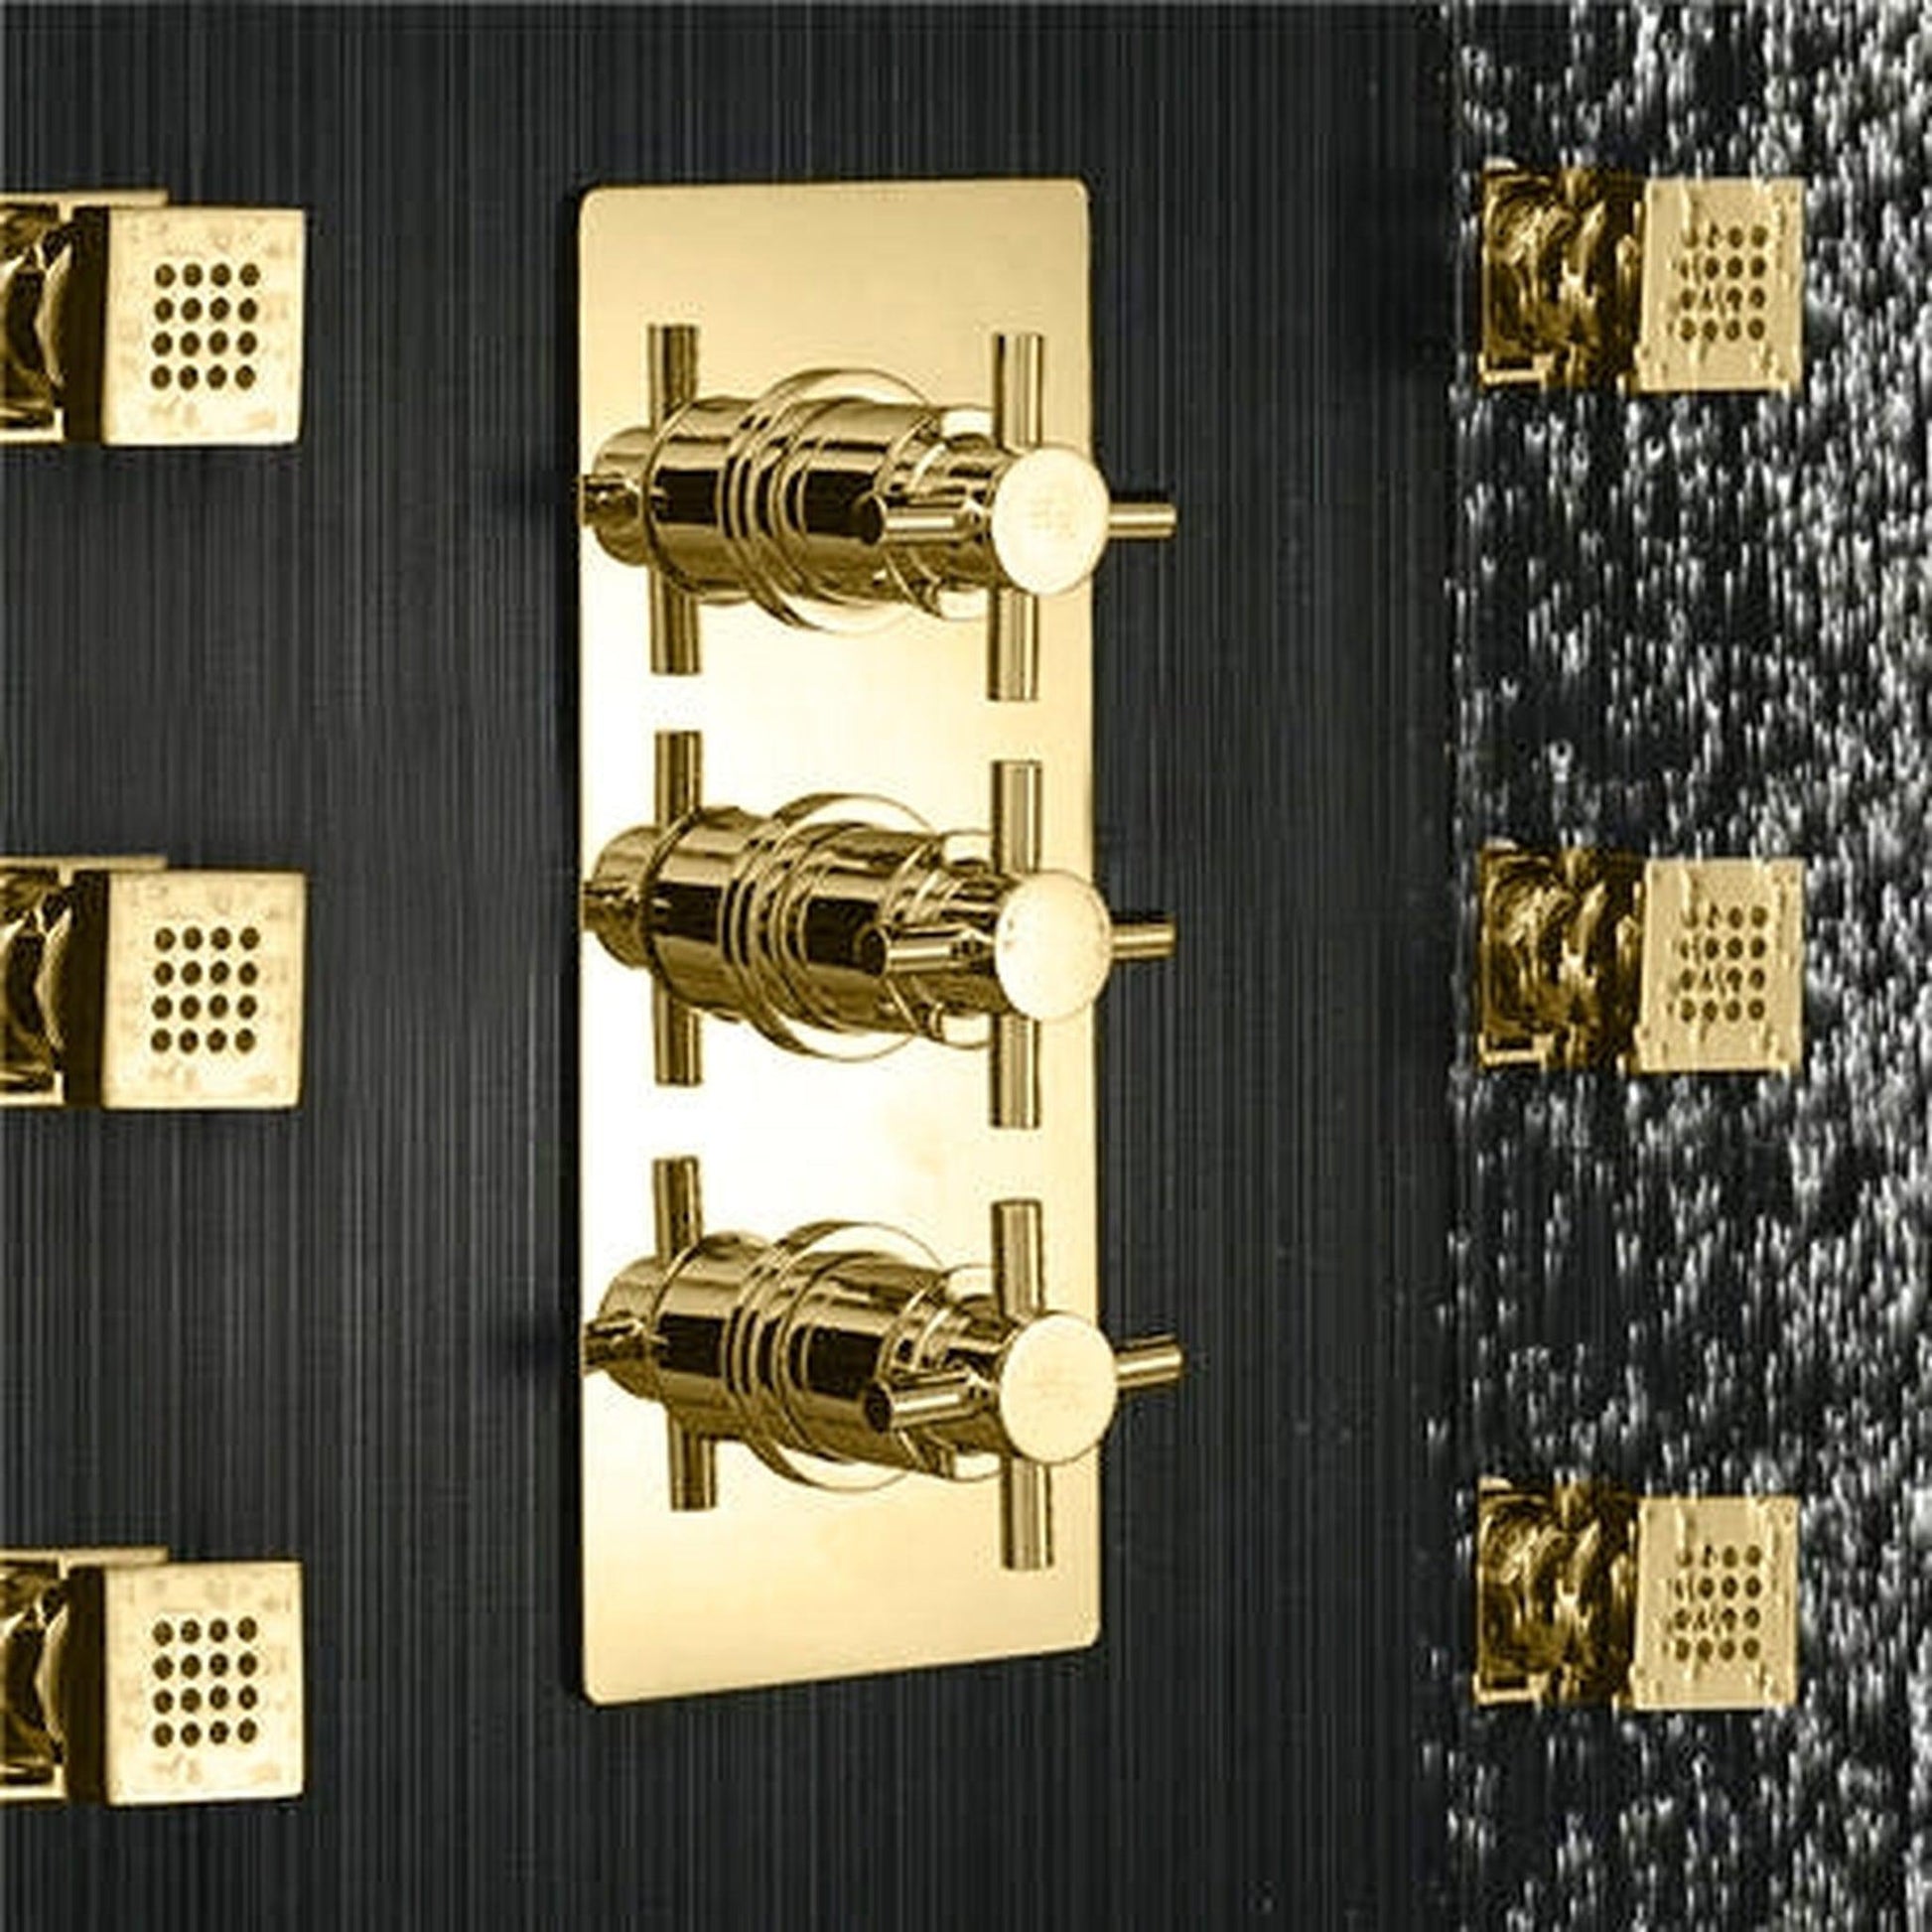 Fontana Reno 12" Gold Round Ceiling Mounted Rainfall Shower System With 6-Body Massage Jets and Hand Shower